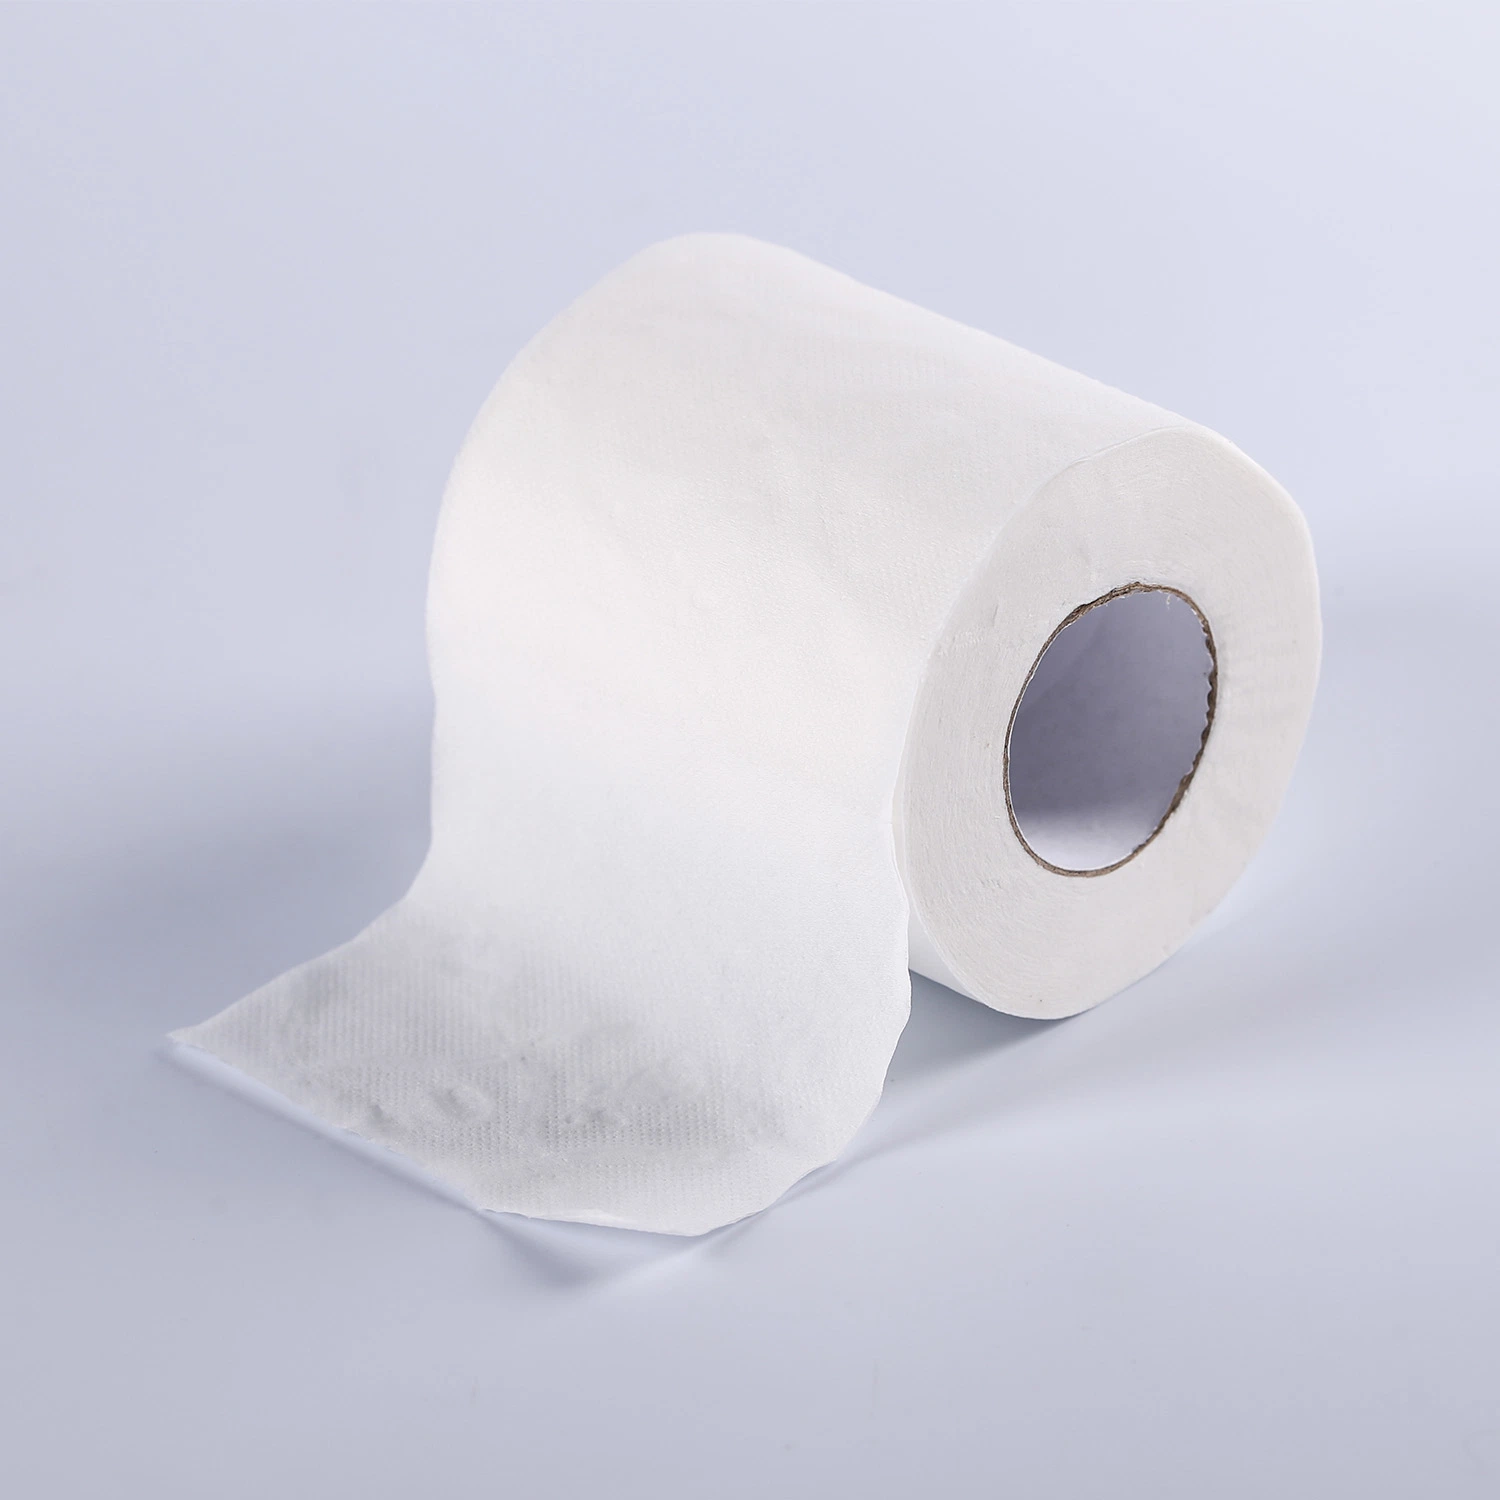 Economic Toilet Roll/ bathroom Roll/Tissue Paper Products/ Embossing Toilet Paper Hygiene /Economy Toilet Paper with OEM Design